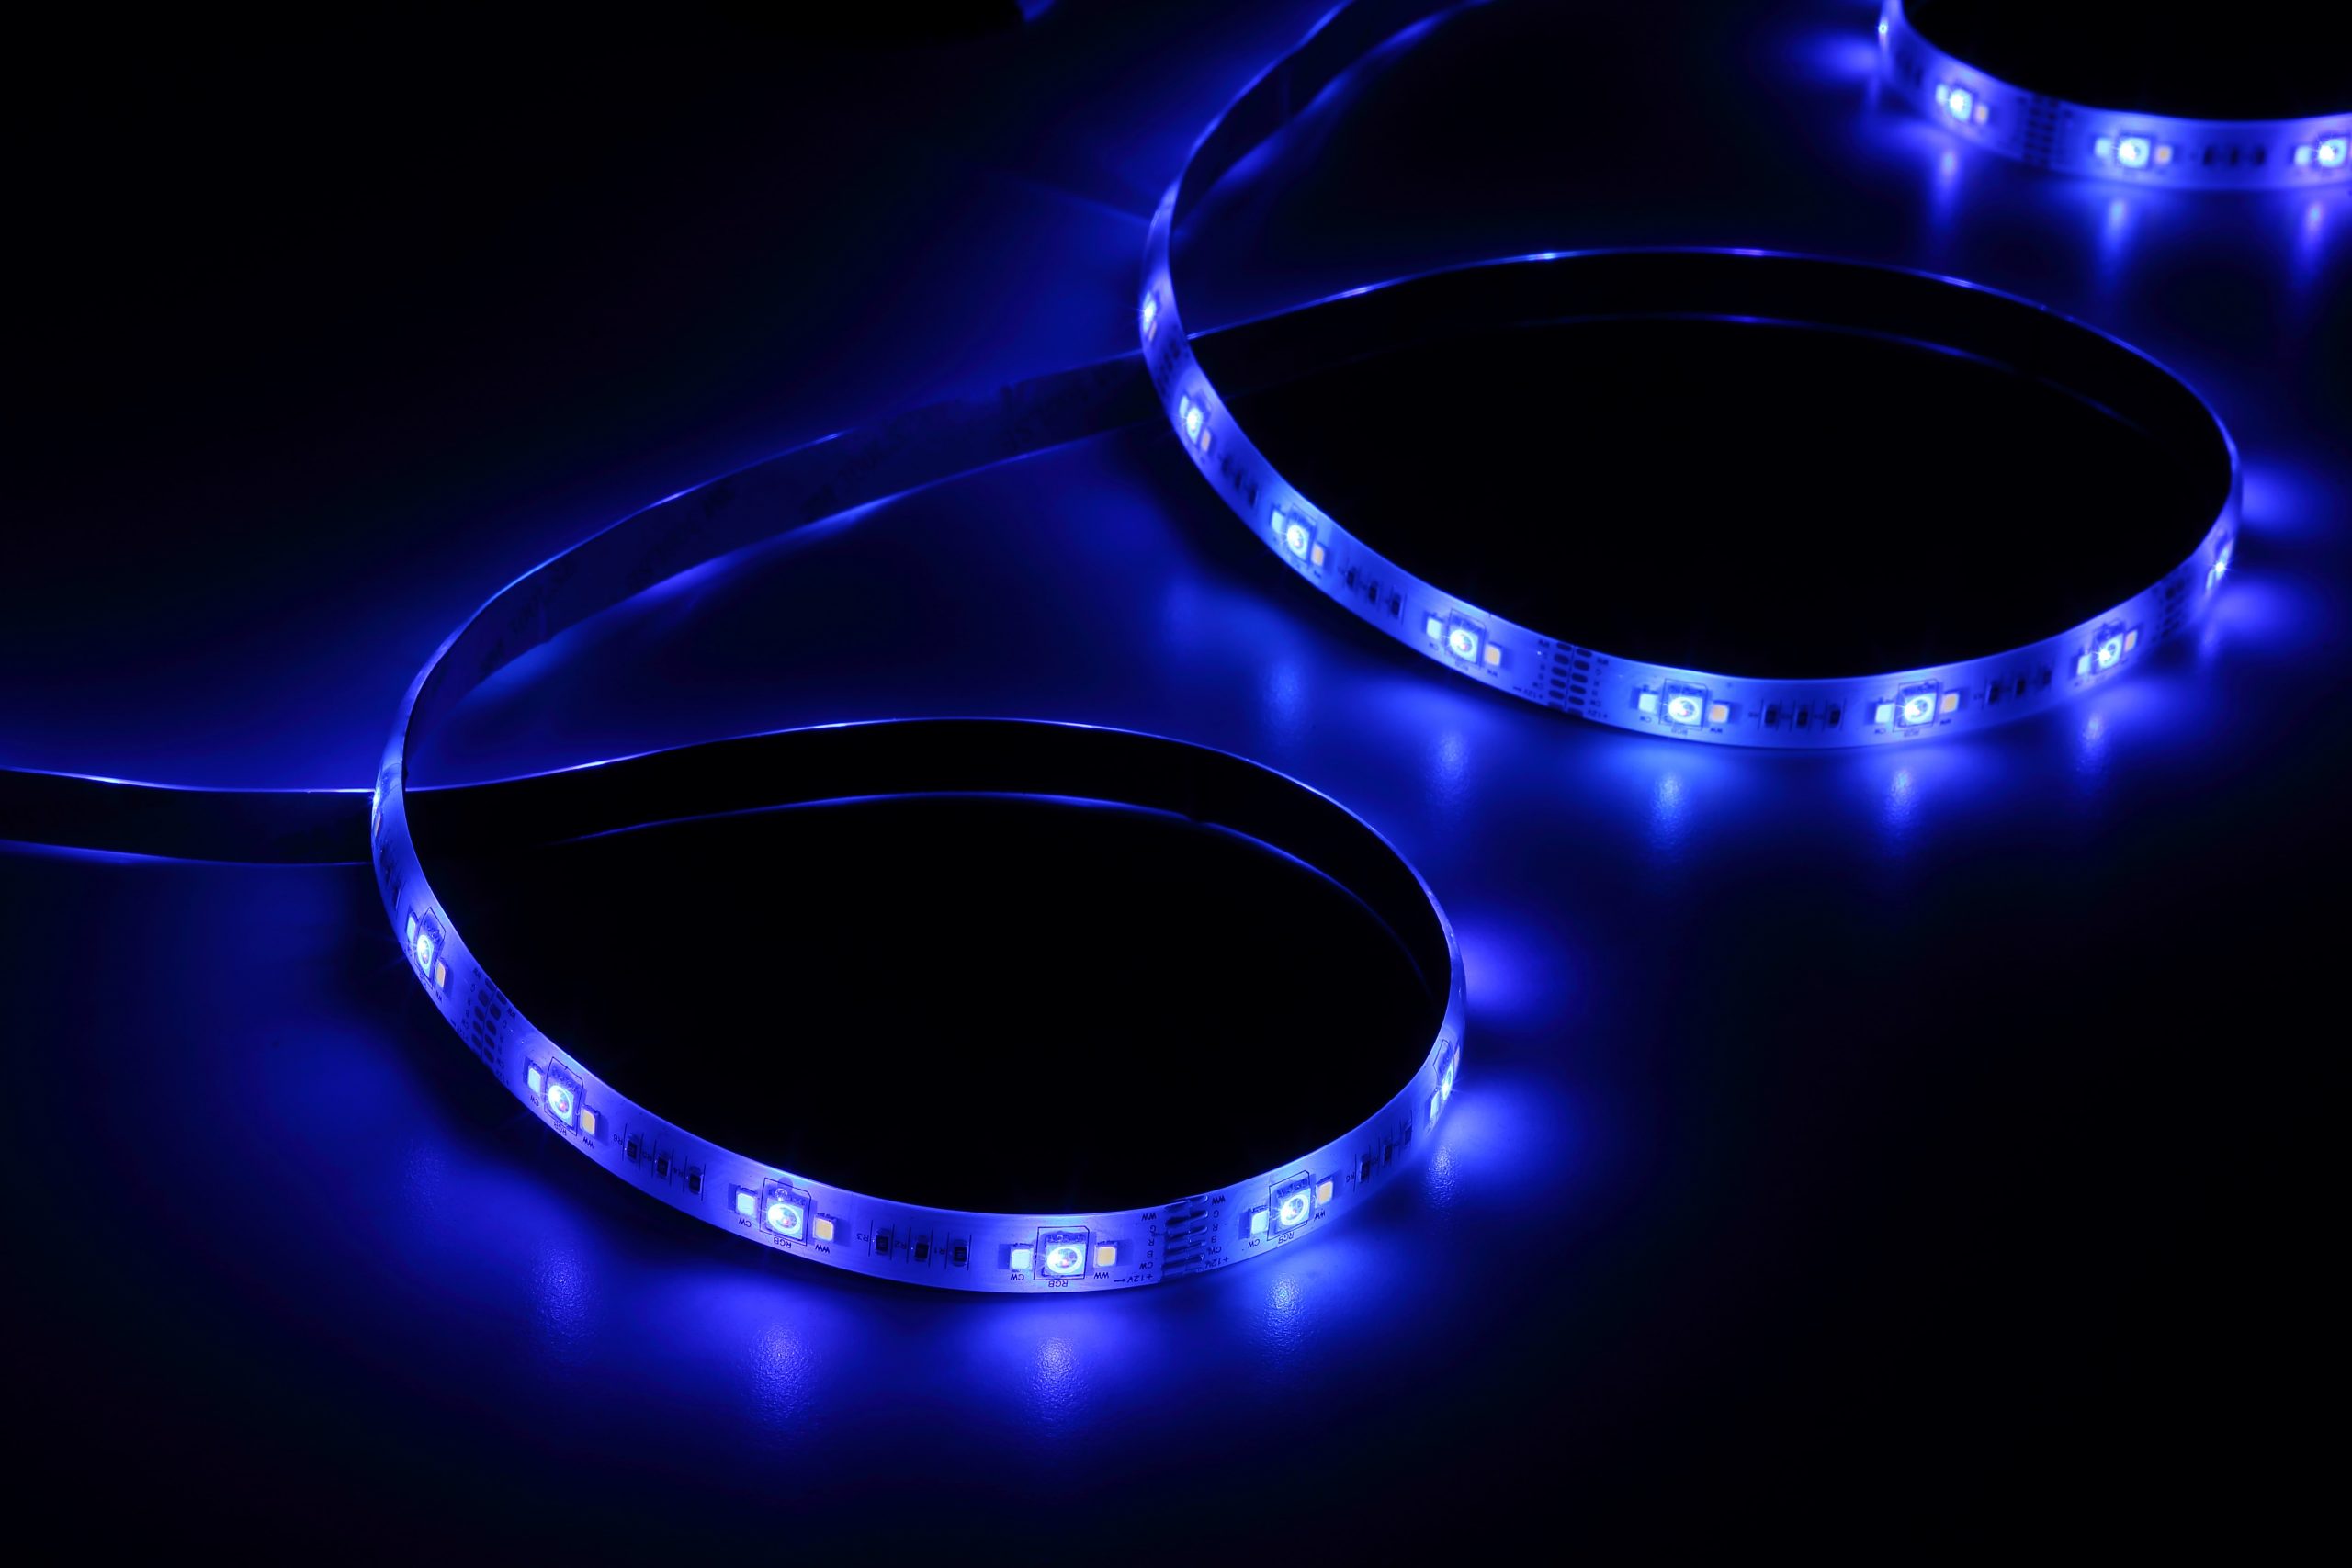 Link2Home » L2H-STRIPRGBCCT – Smart Light Strip with Colours and Music Sync  – 5m